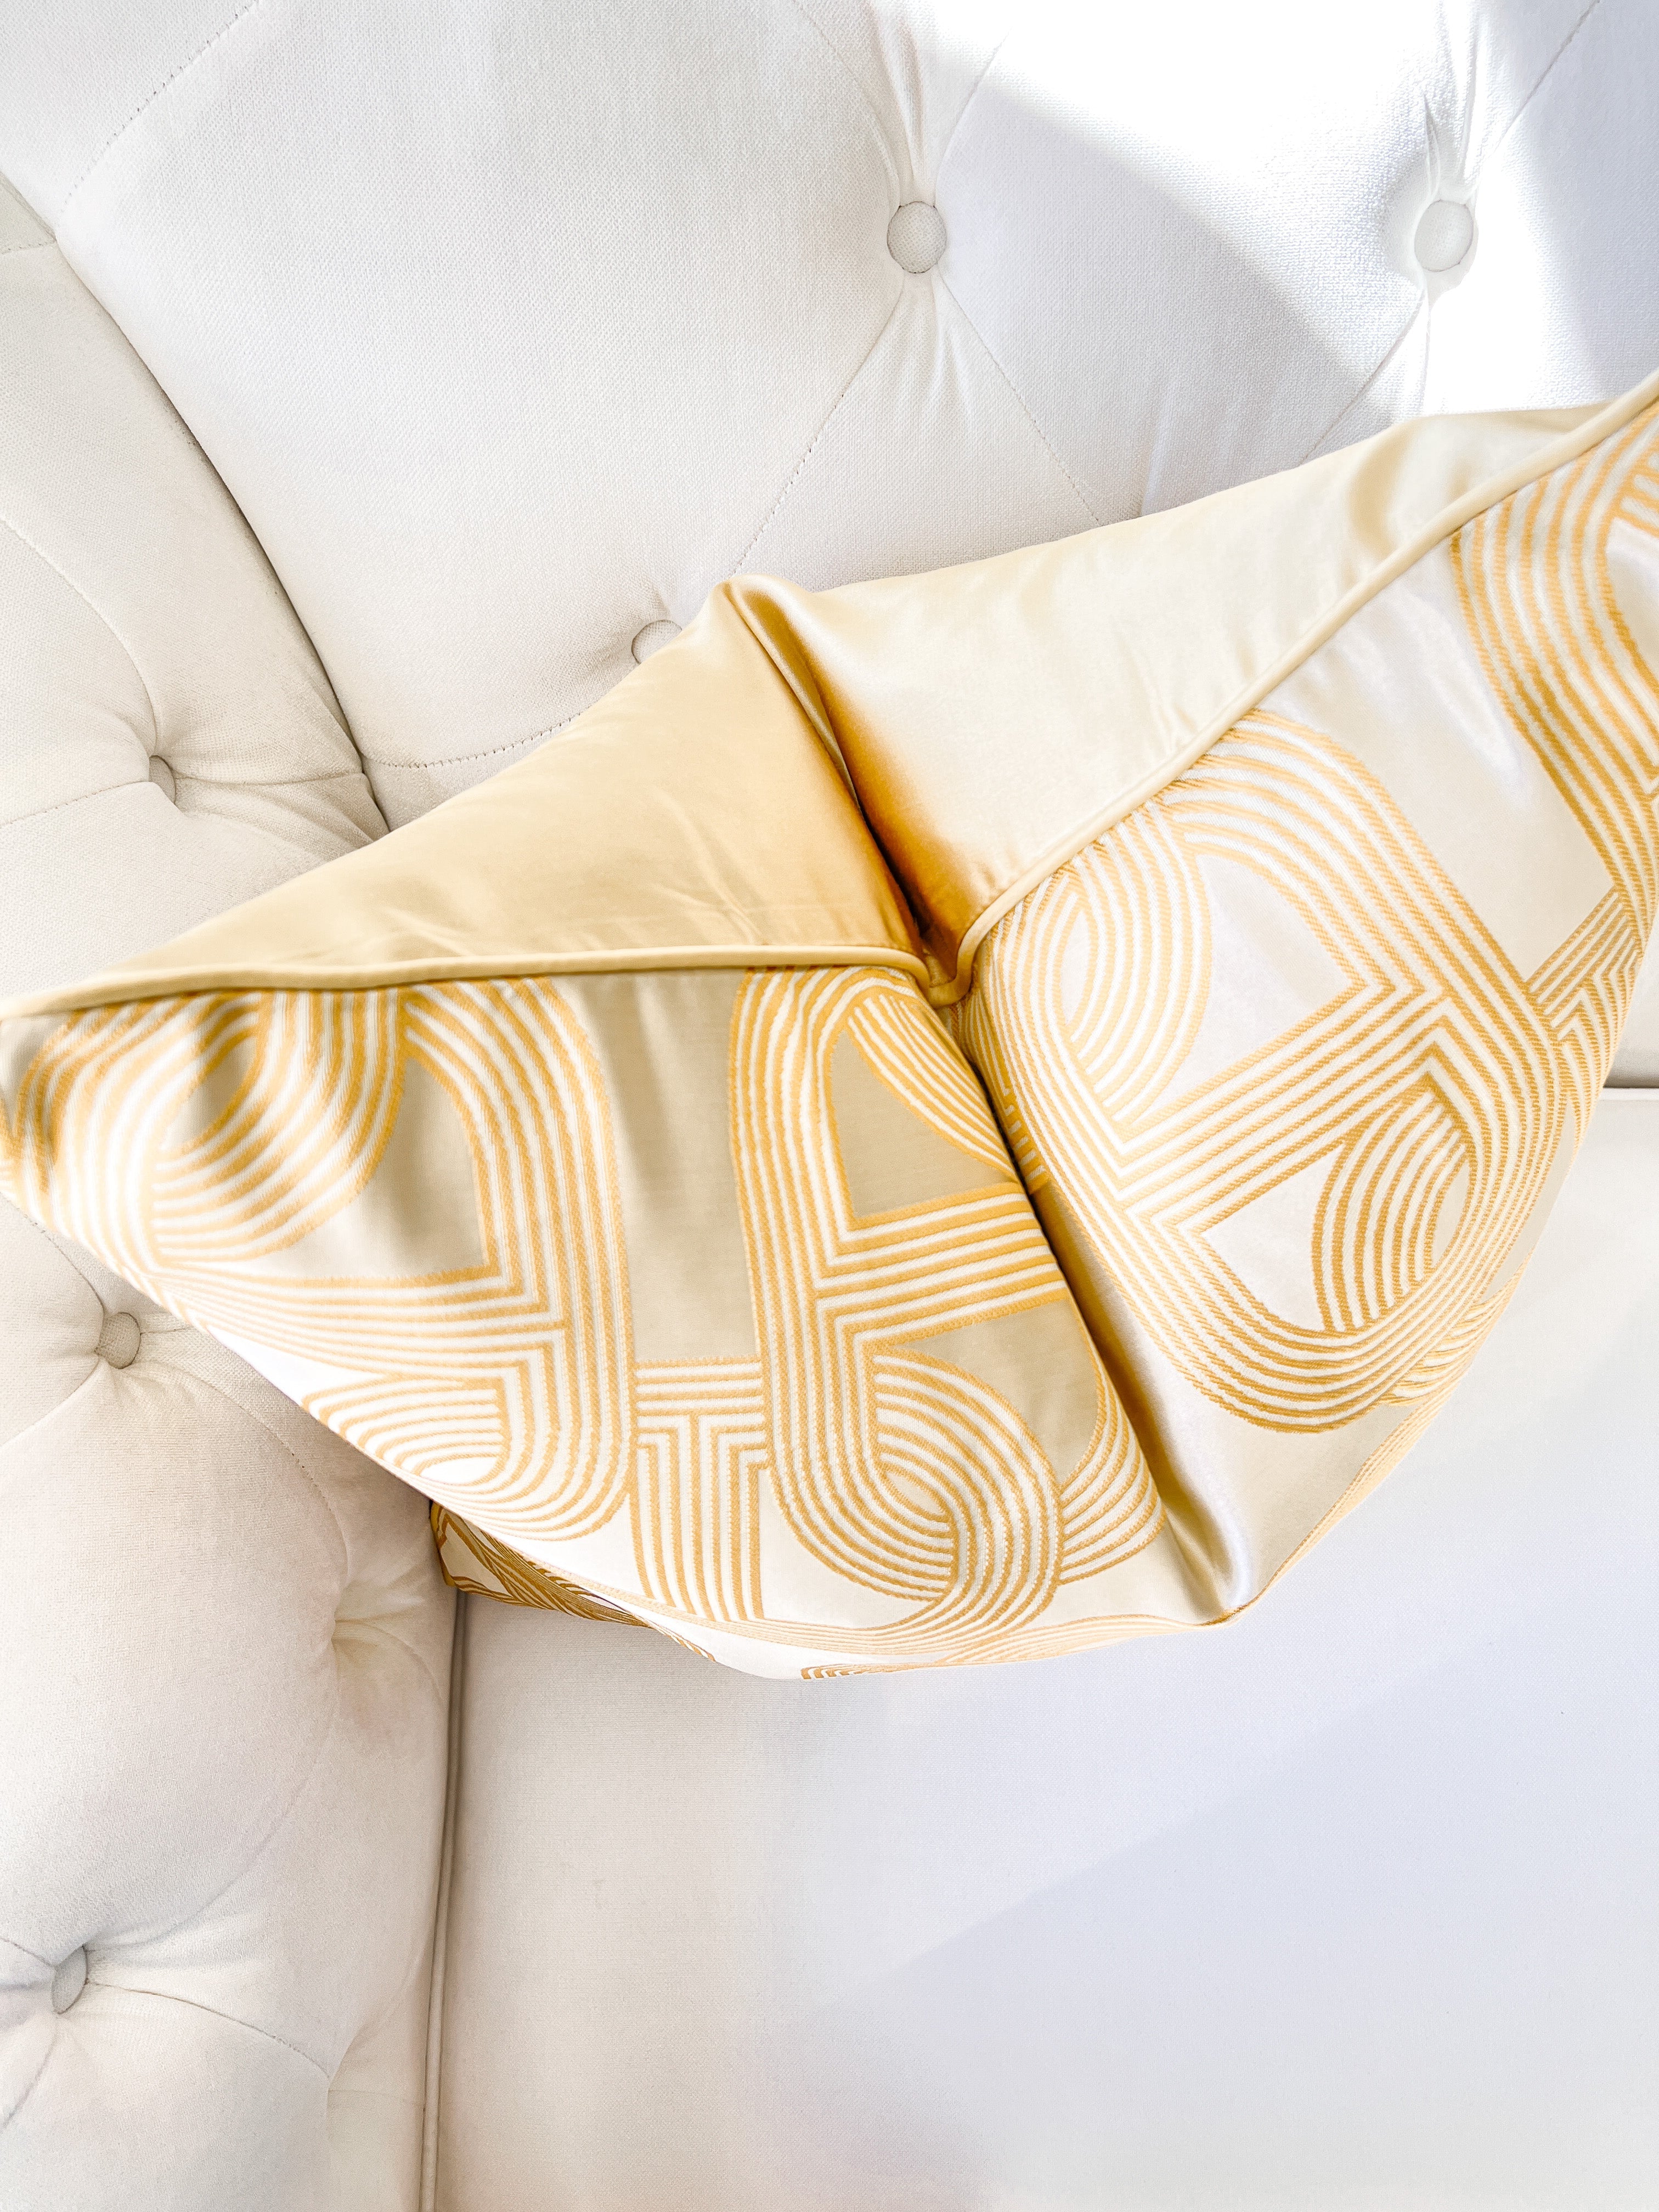 Gold Champagne Abstract Pillow Cover - HTS HOME DECOR